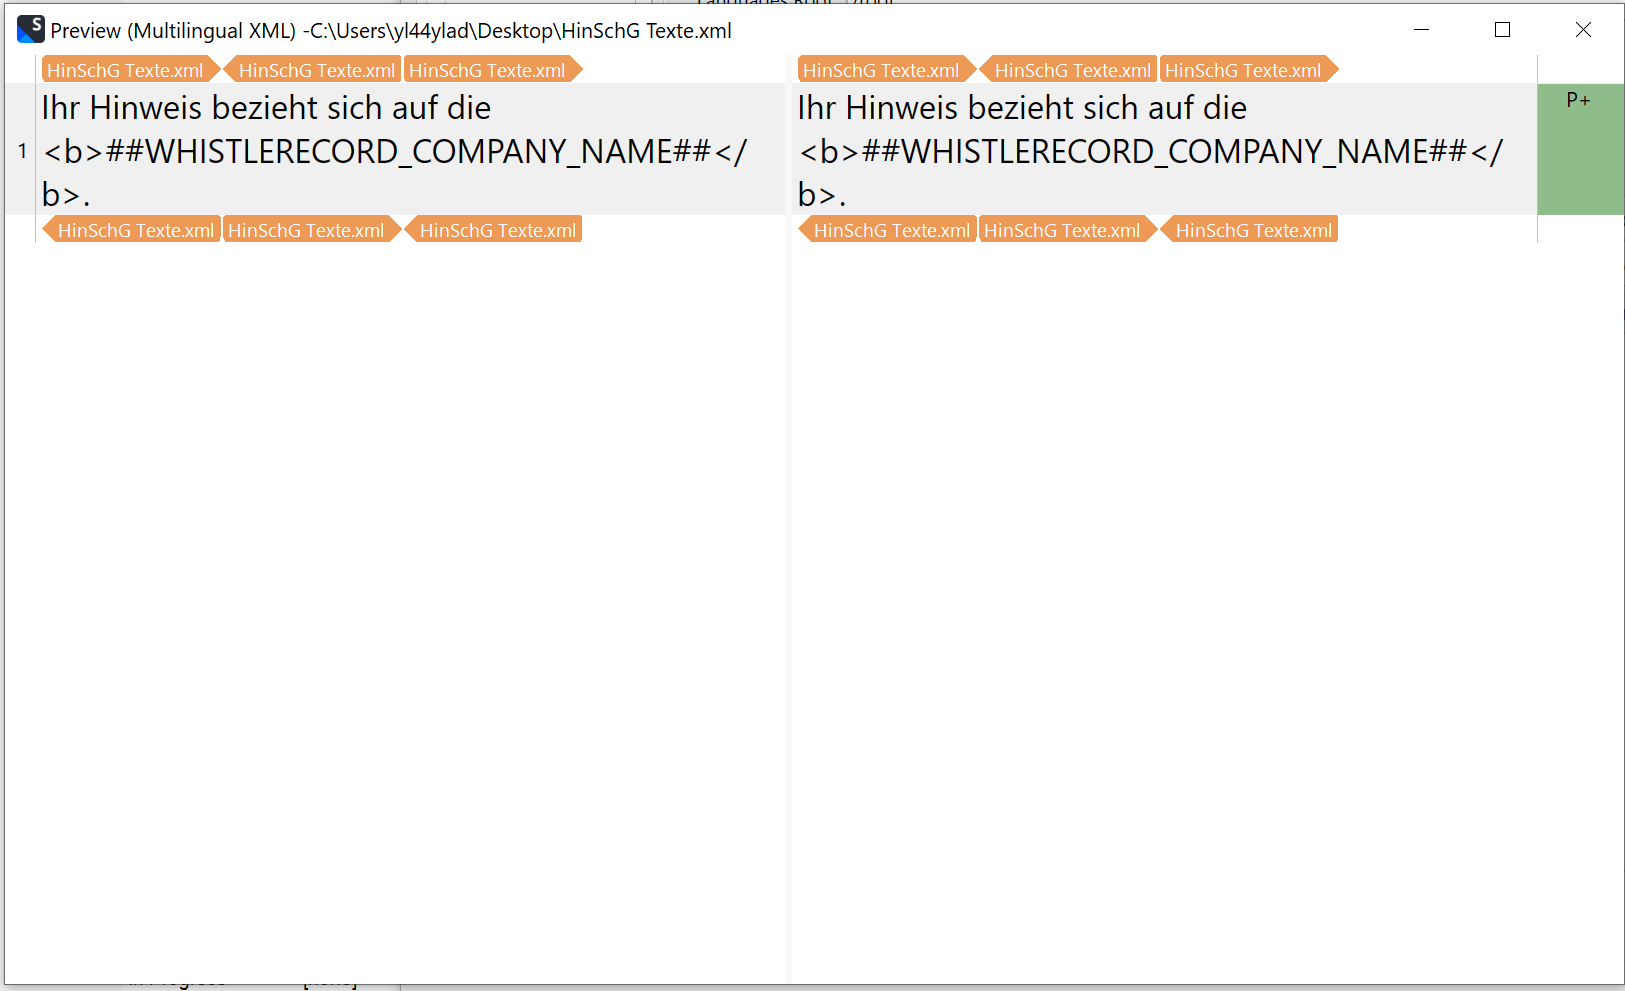 Preview of Multilingual XML in Trados Studio with German text 'Ihr Hinweis bezieht sich auf die ##WHISTLERECORD_COMPANY_NAME##' and corresponding bold tags visible.